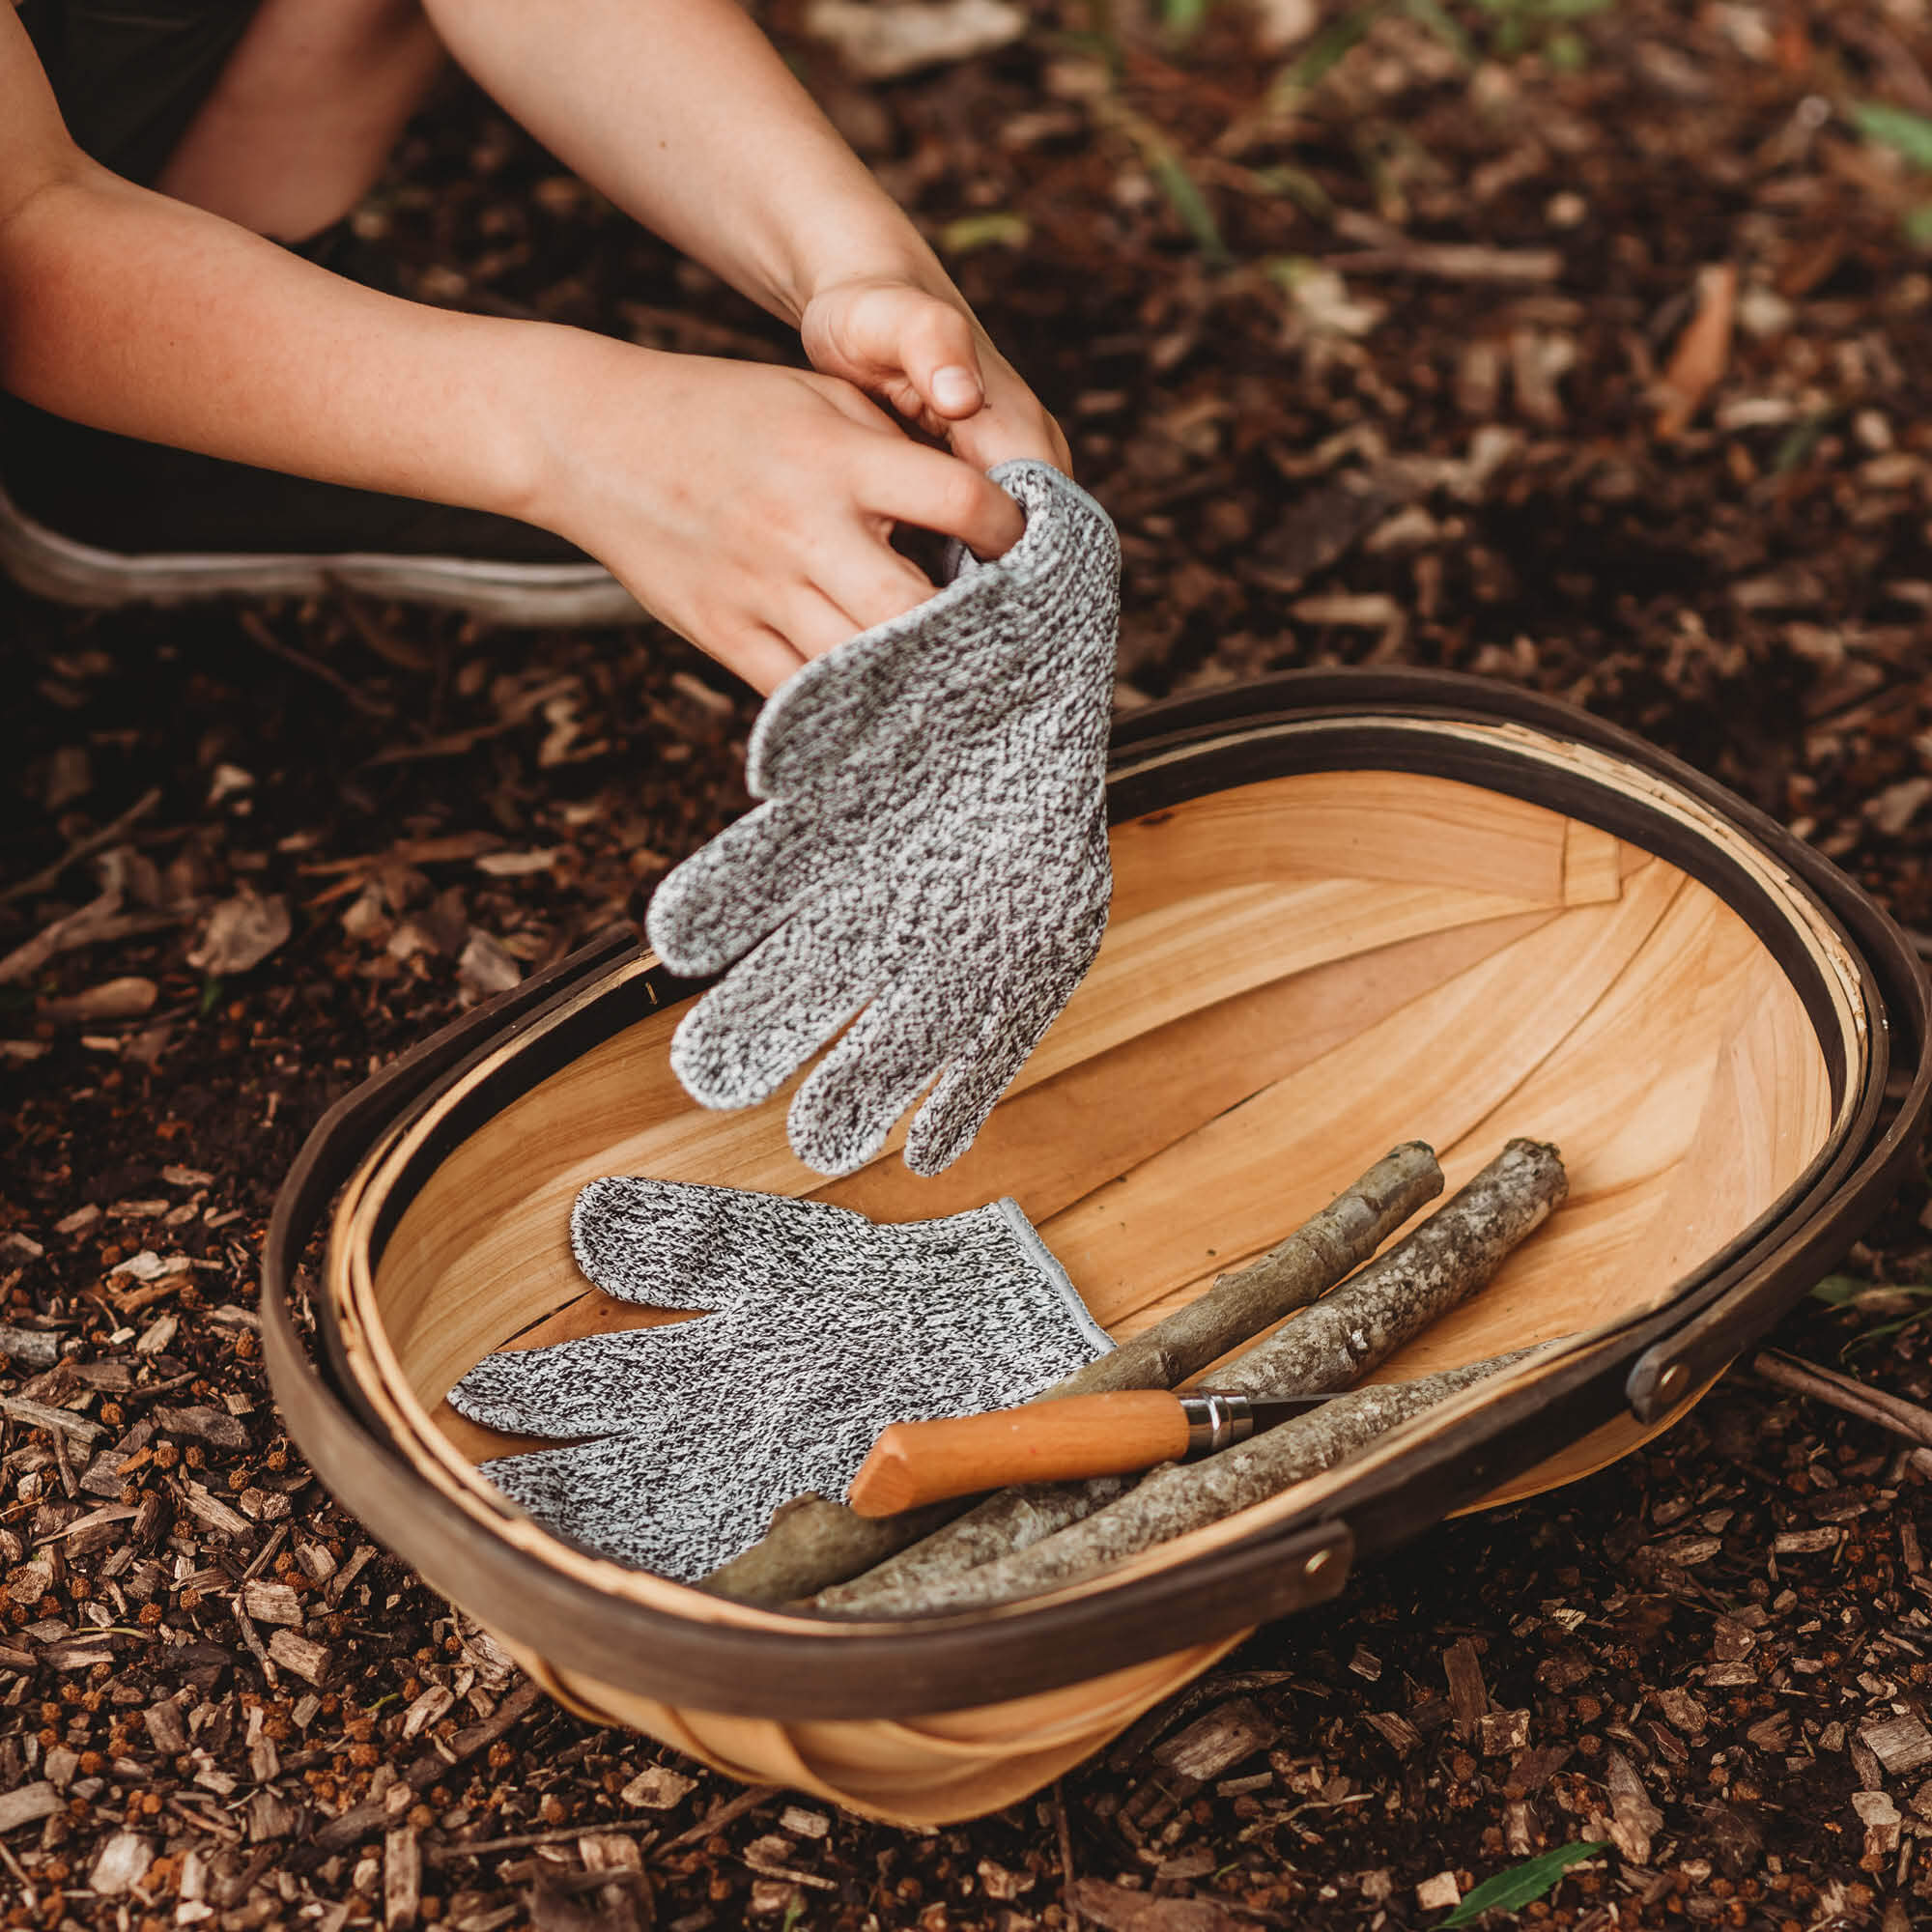 Child wearing cut resistant gloves for kids when doing wood whittling and using other tools for nature craft, from Your Wild Books. Level 5 HPPE protection.